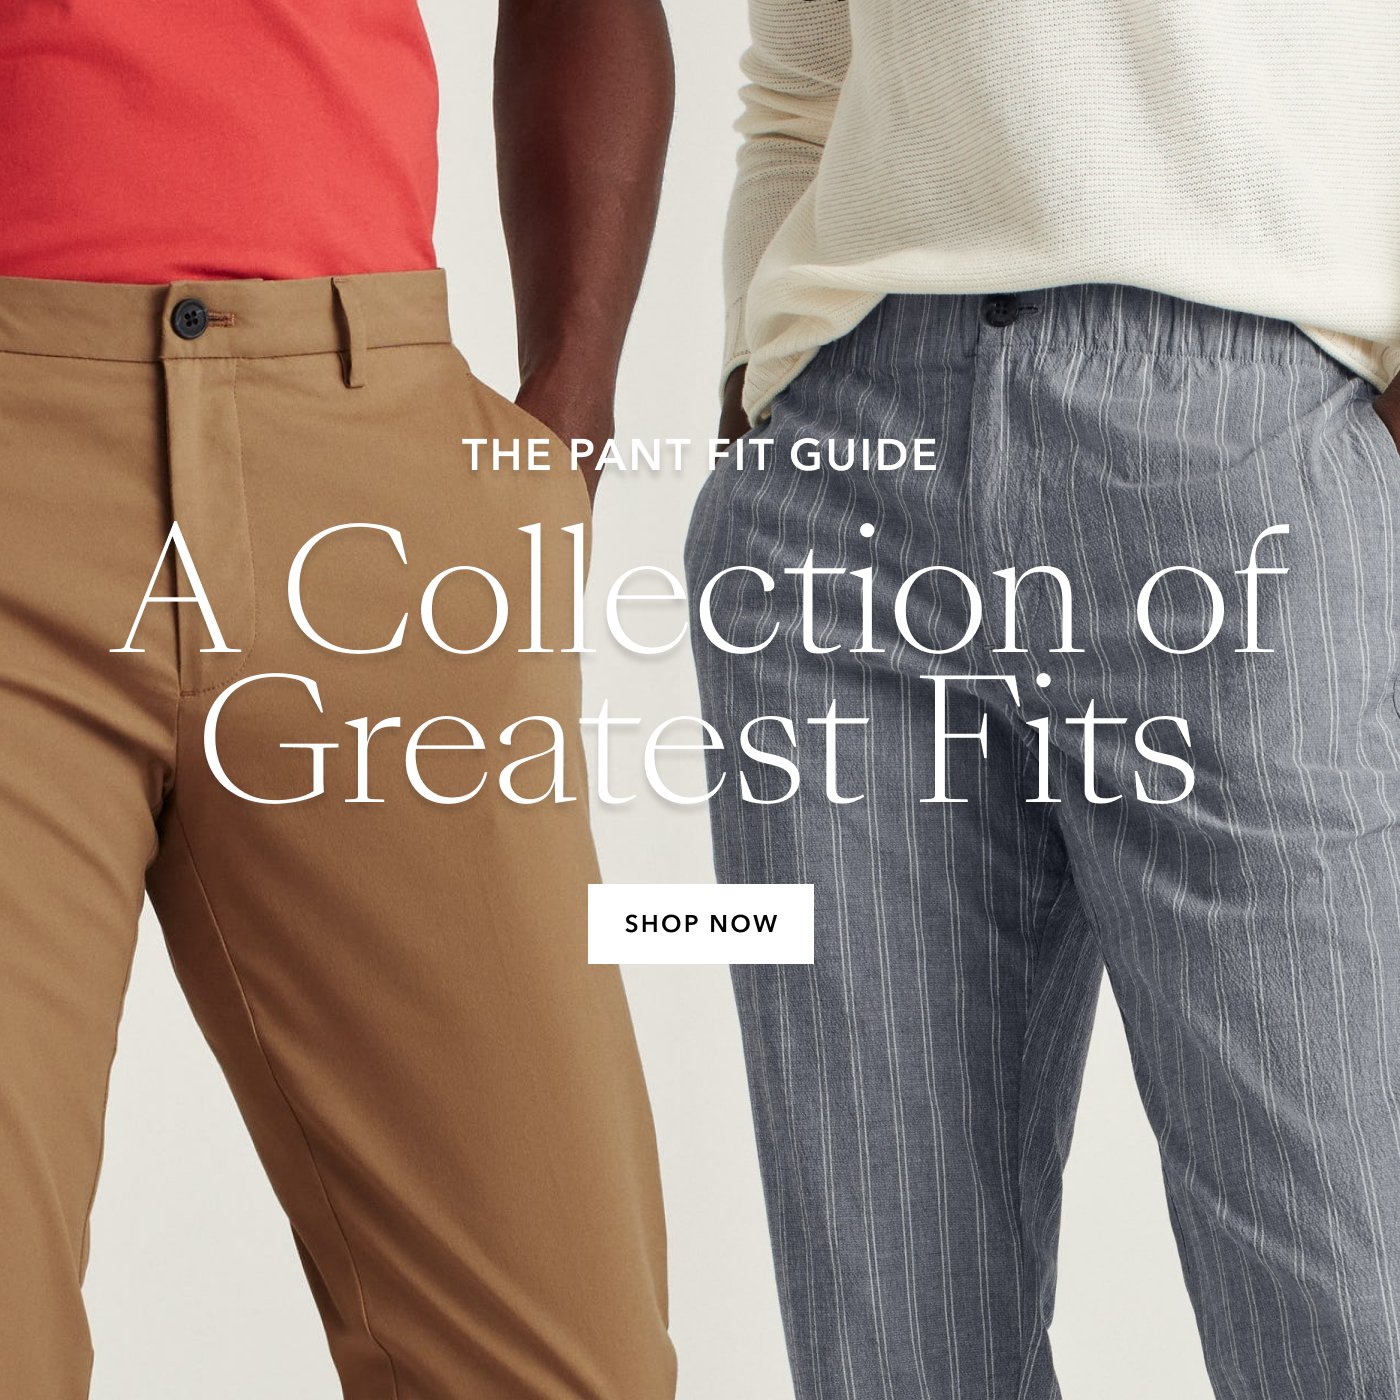 Bonobos: Pant Fit Guide: You Need Fit, We Got Fit